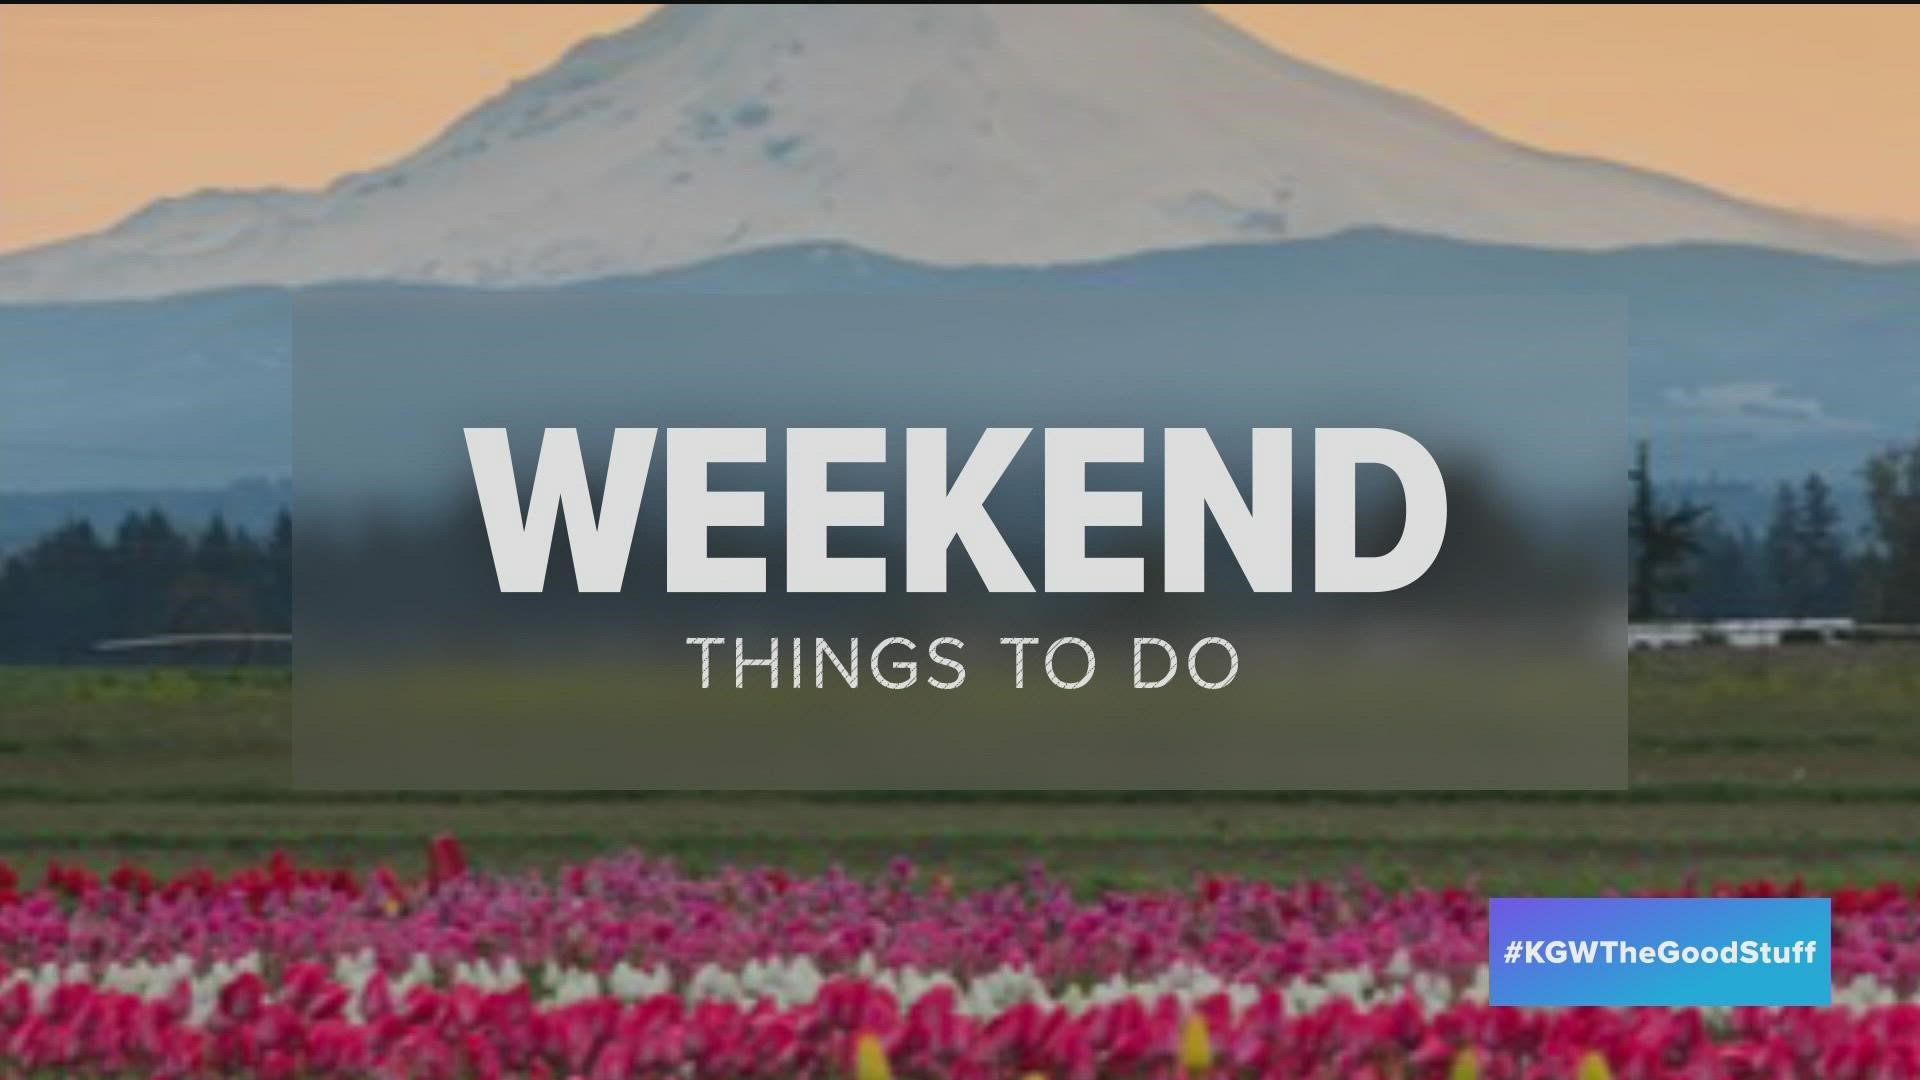 Looking for something to do this weekend? There's a swap meet at the Portland International Raceway, a leaping musical "A Year with Frog and Toad", and more.